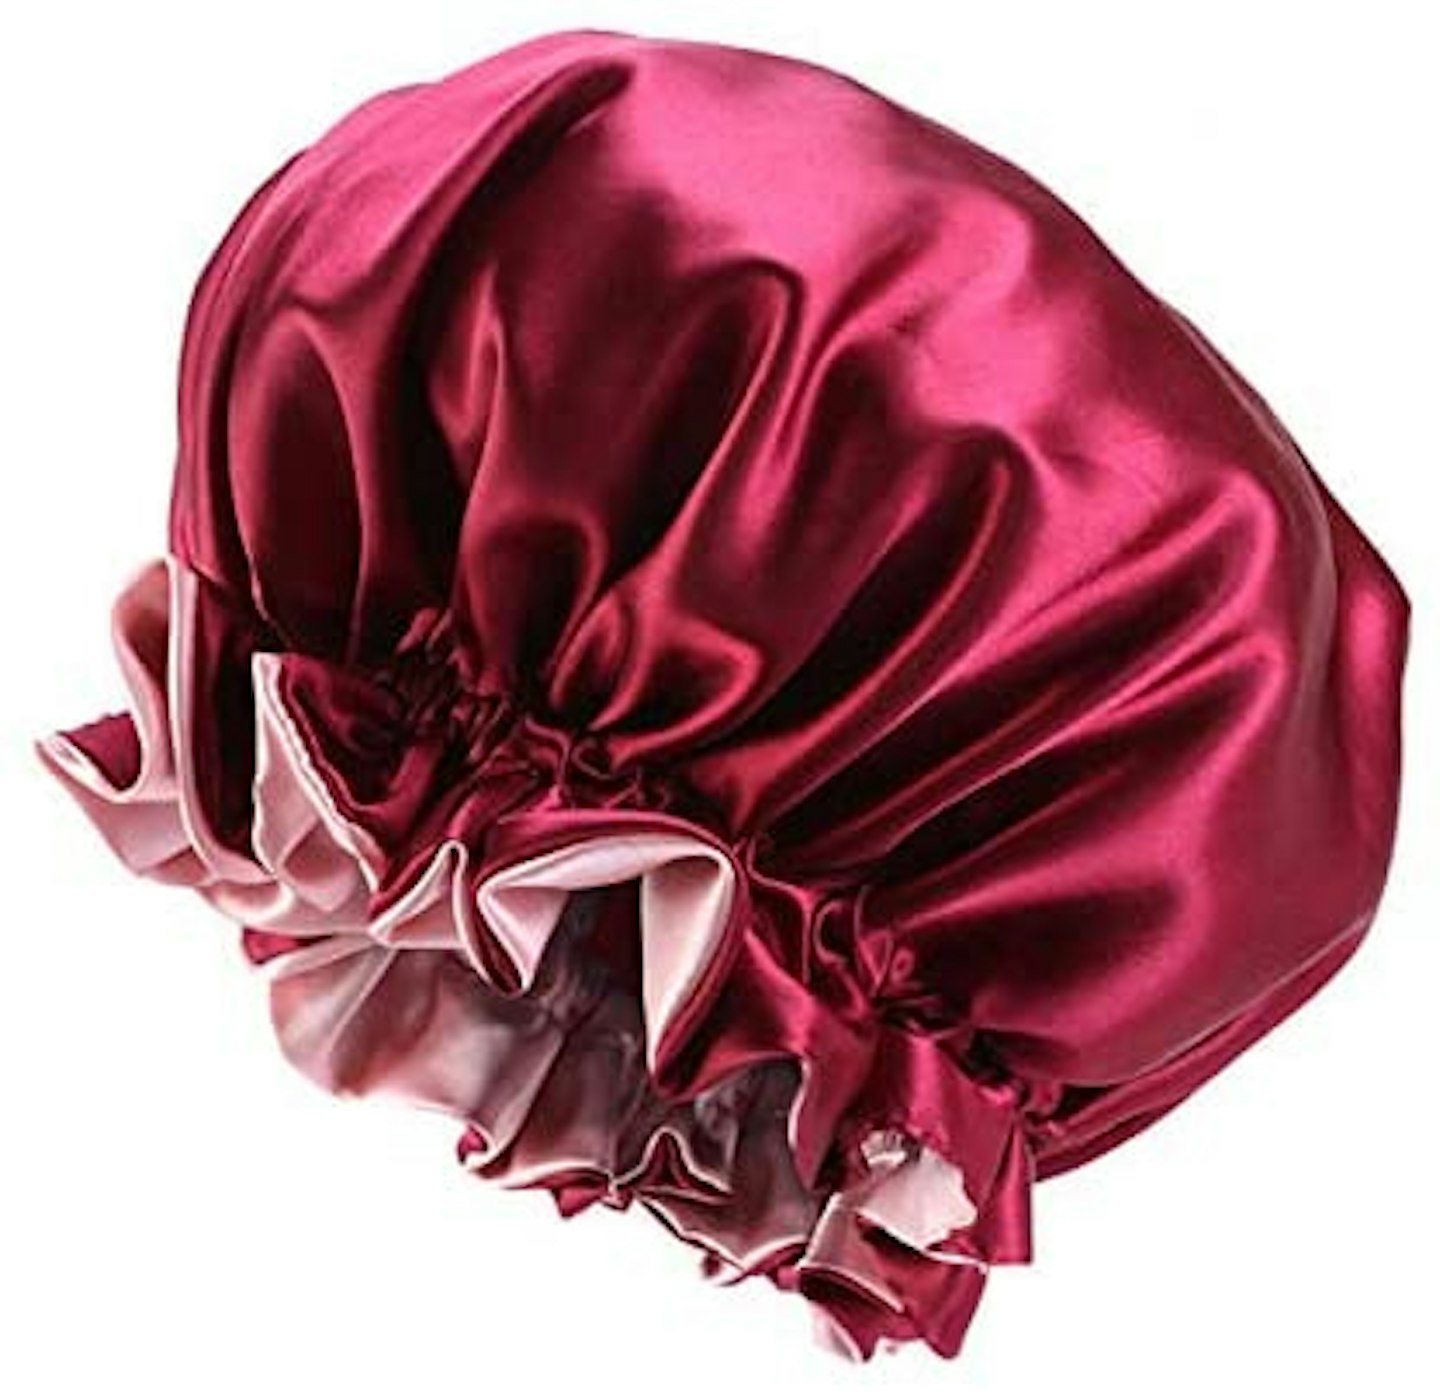 Sleeping in a Silk Bonnet: Why You Should Have One?